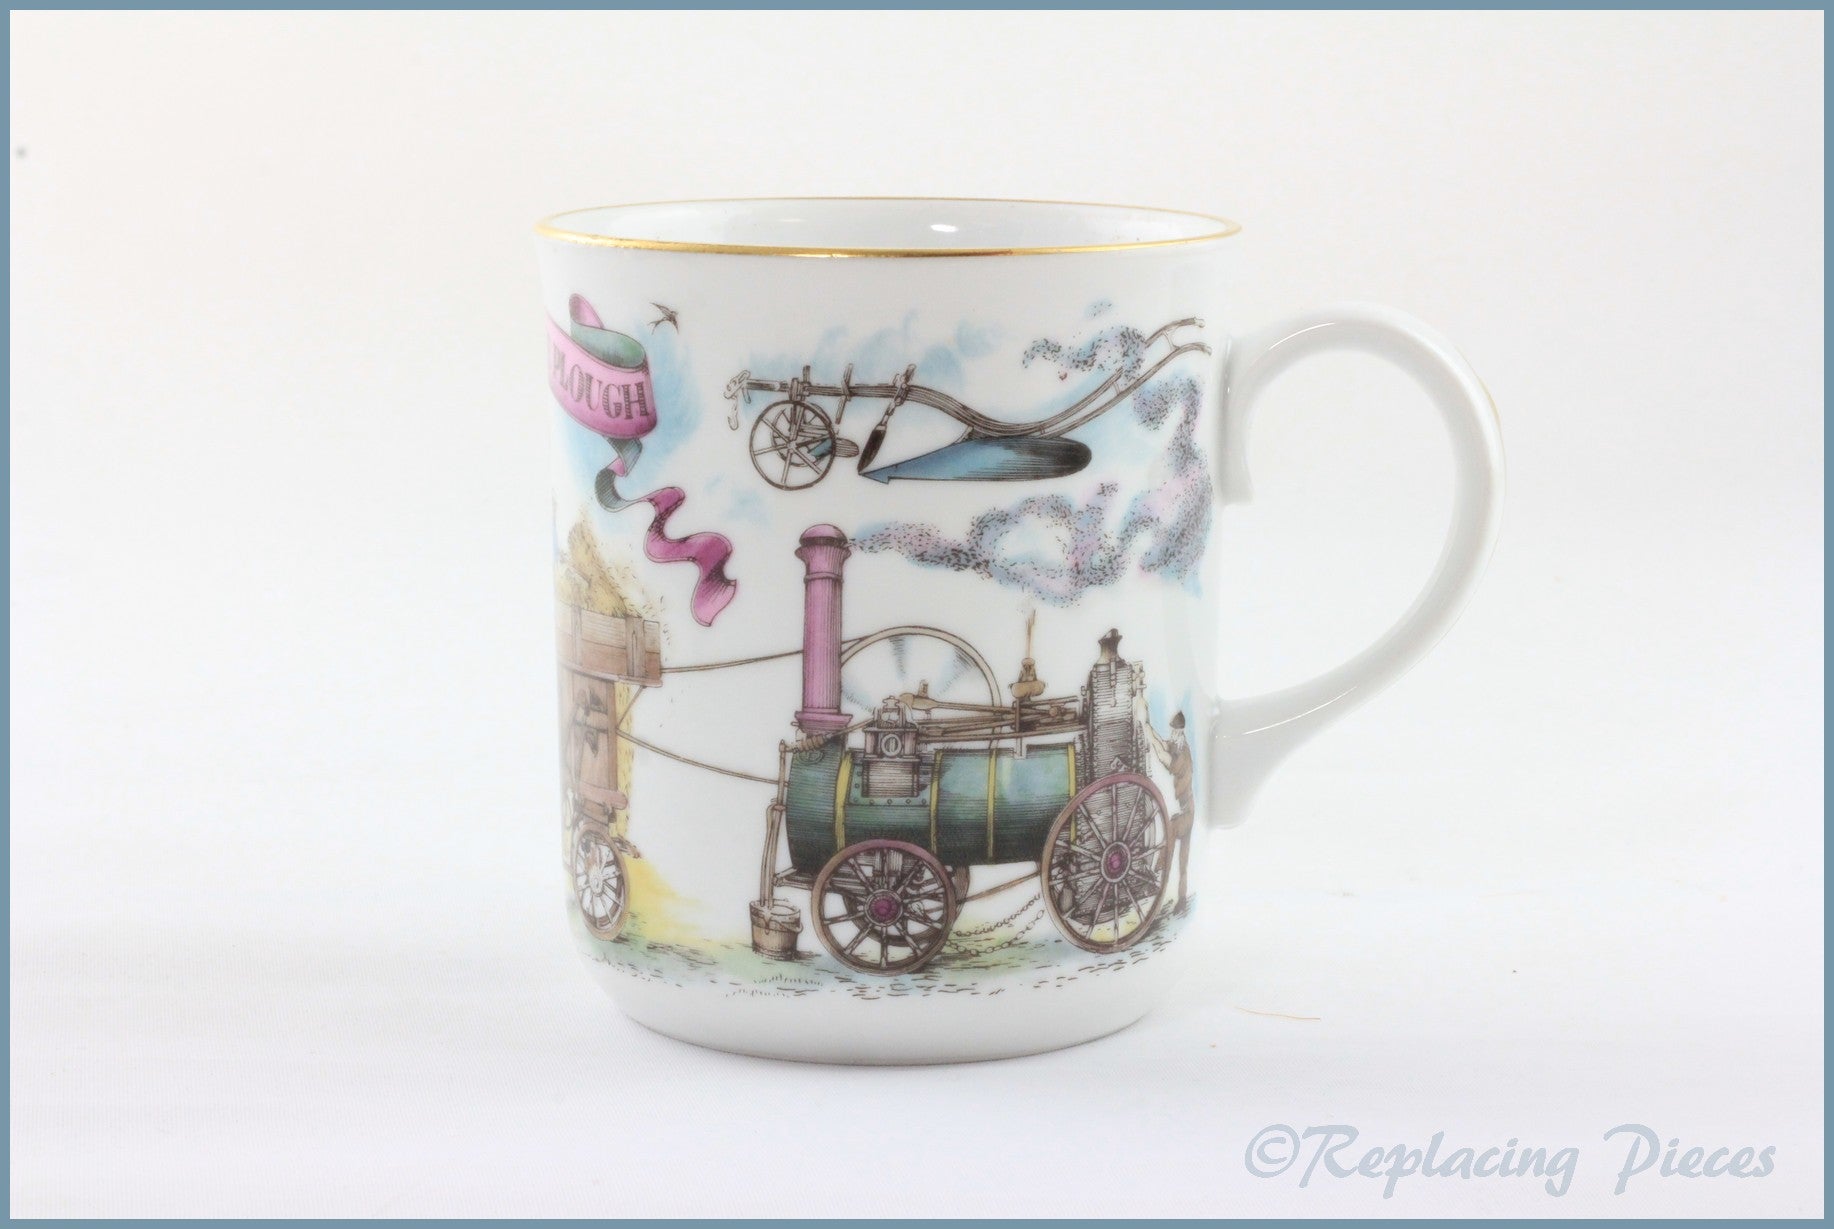 Royal Worcester - Mugs - God Speed The Plough